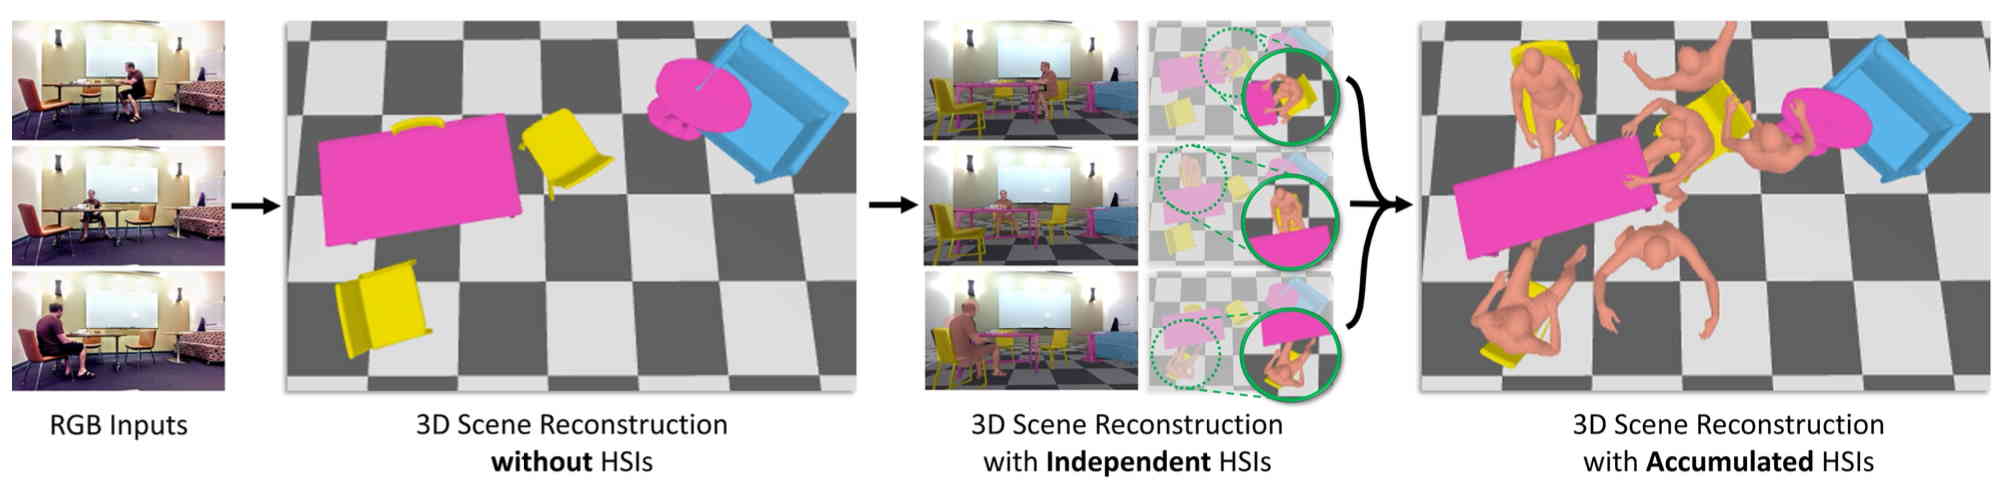 Mover: Human-Aware Object Placement for Visual Environment Reconstruction